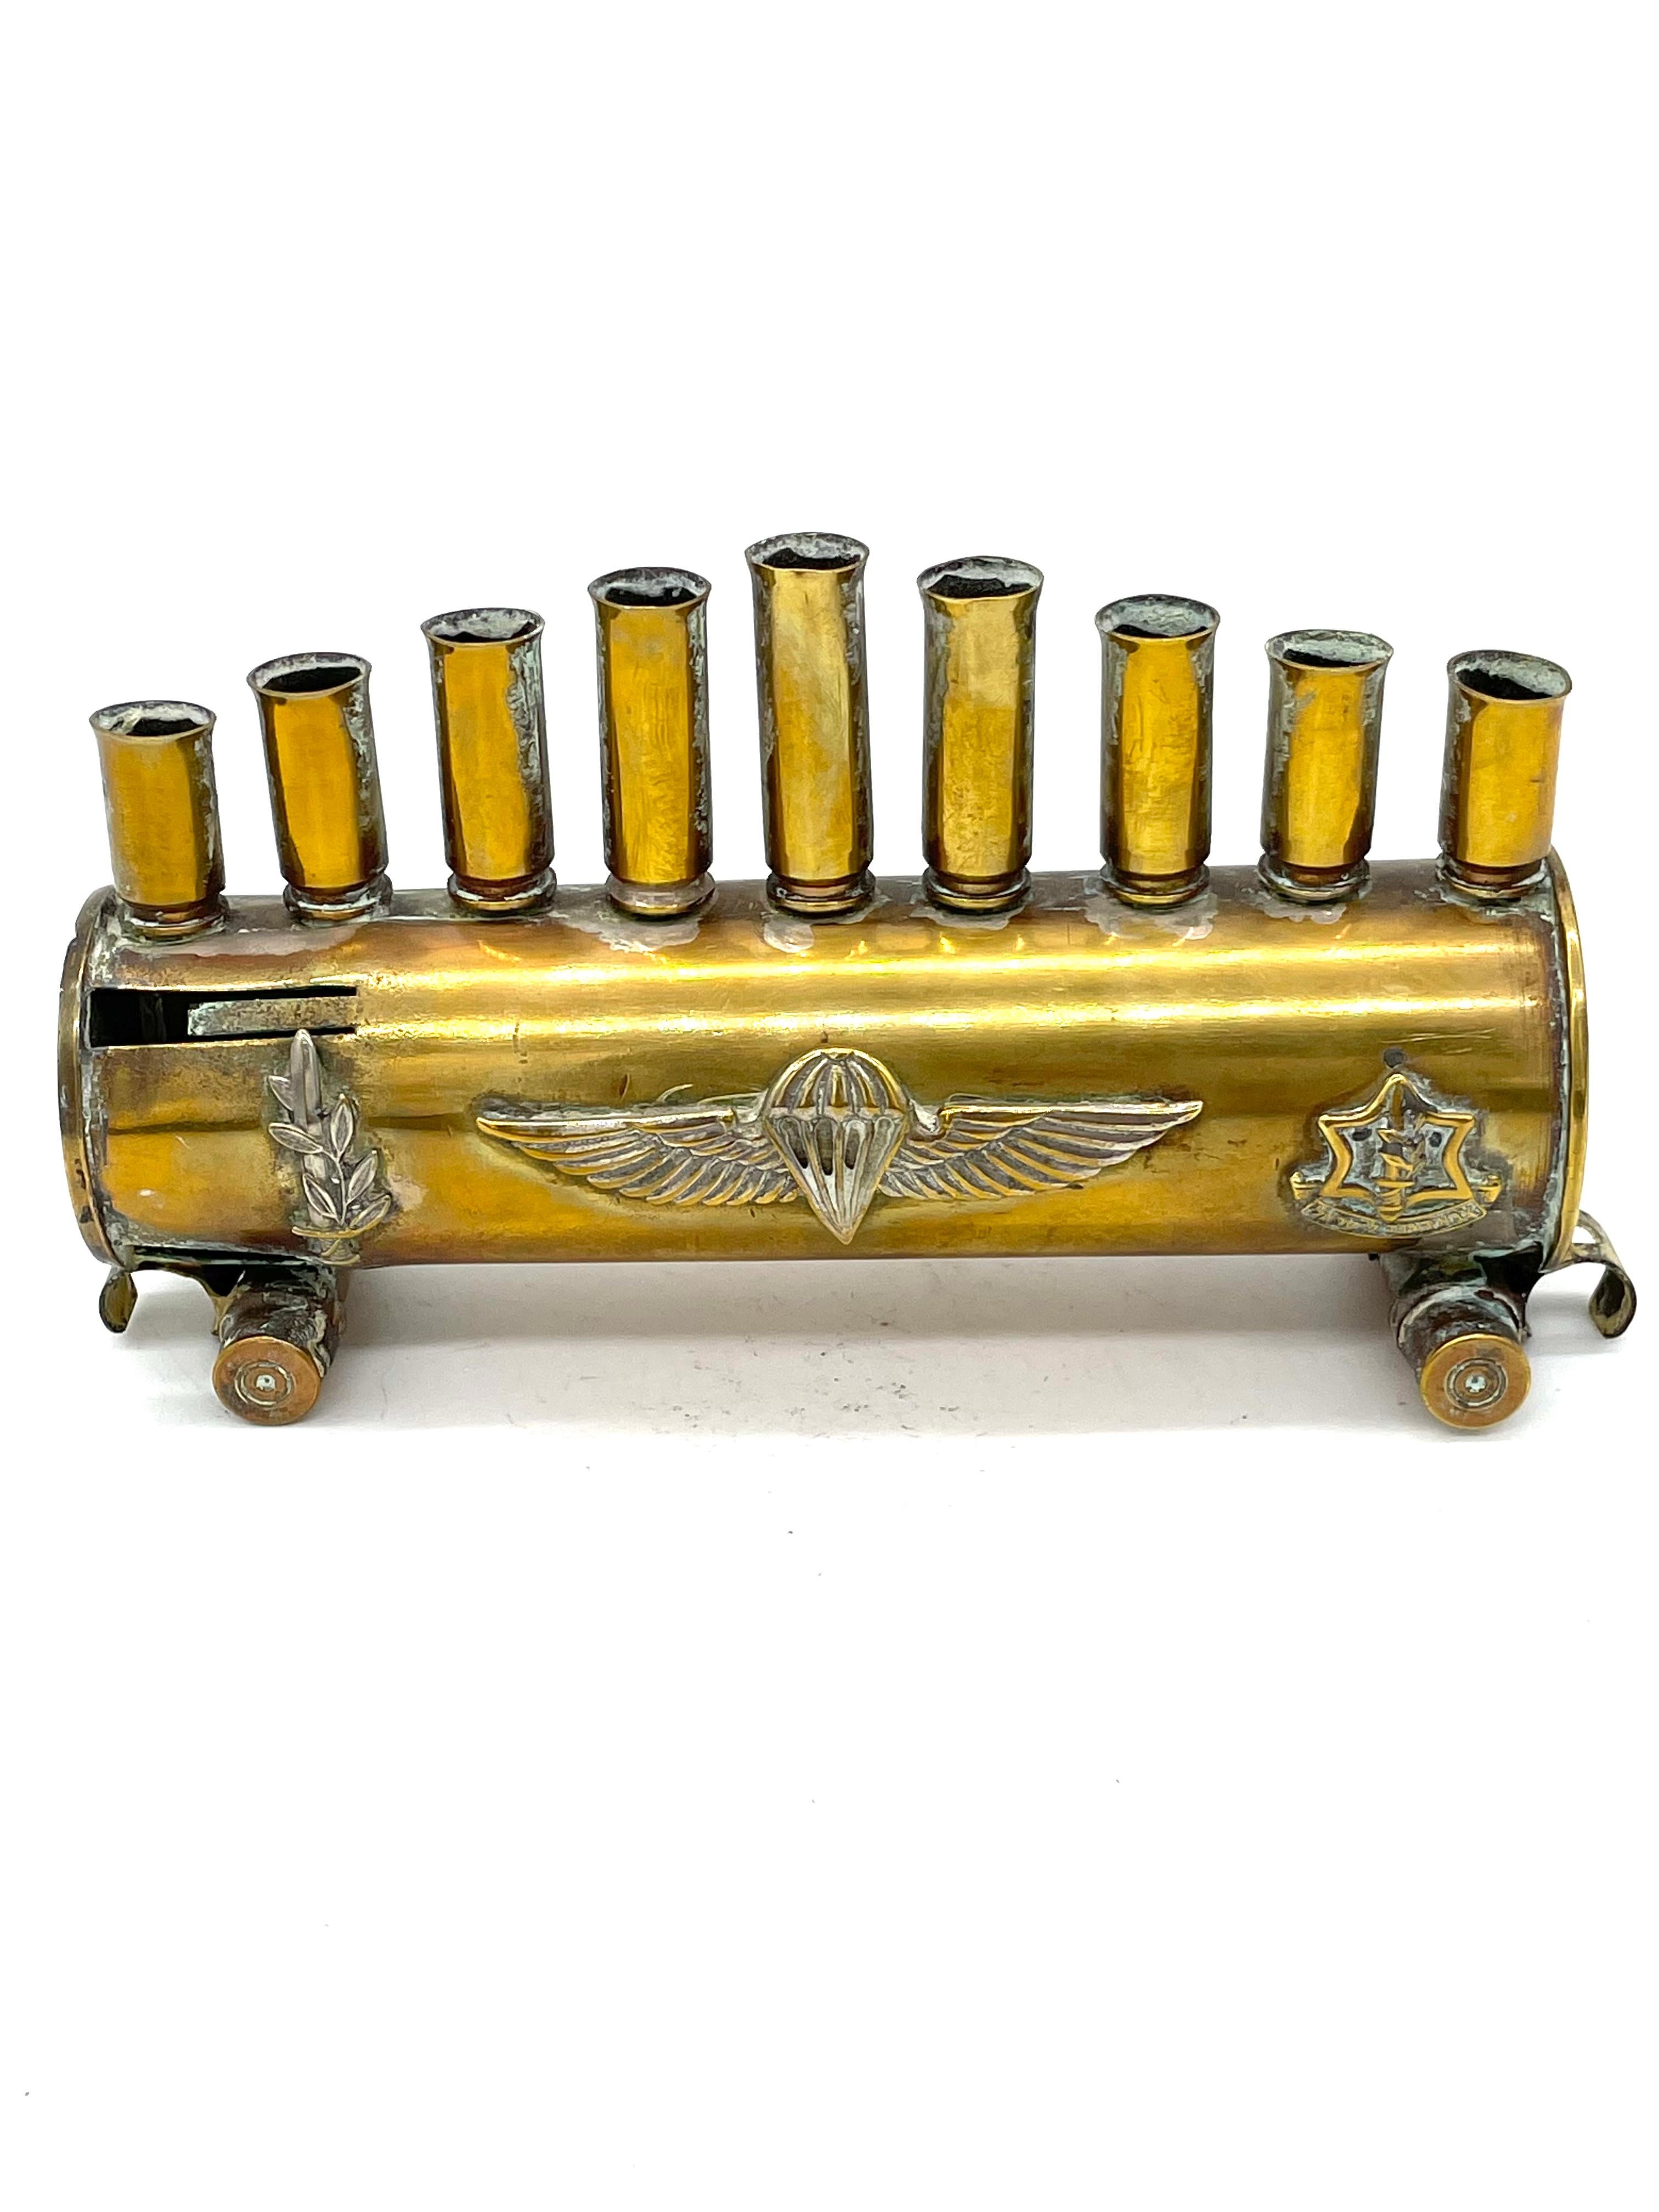 A brass Hanukkah lamp made by Israeli Defense soldiers features nine bullet and shell cartridges in the form of candleholders. The bullet cartridges soldered onto a 40-mm shell cartridge, itself supported on two additional bullet cartridges.